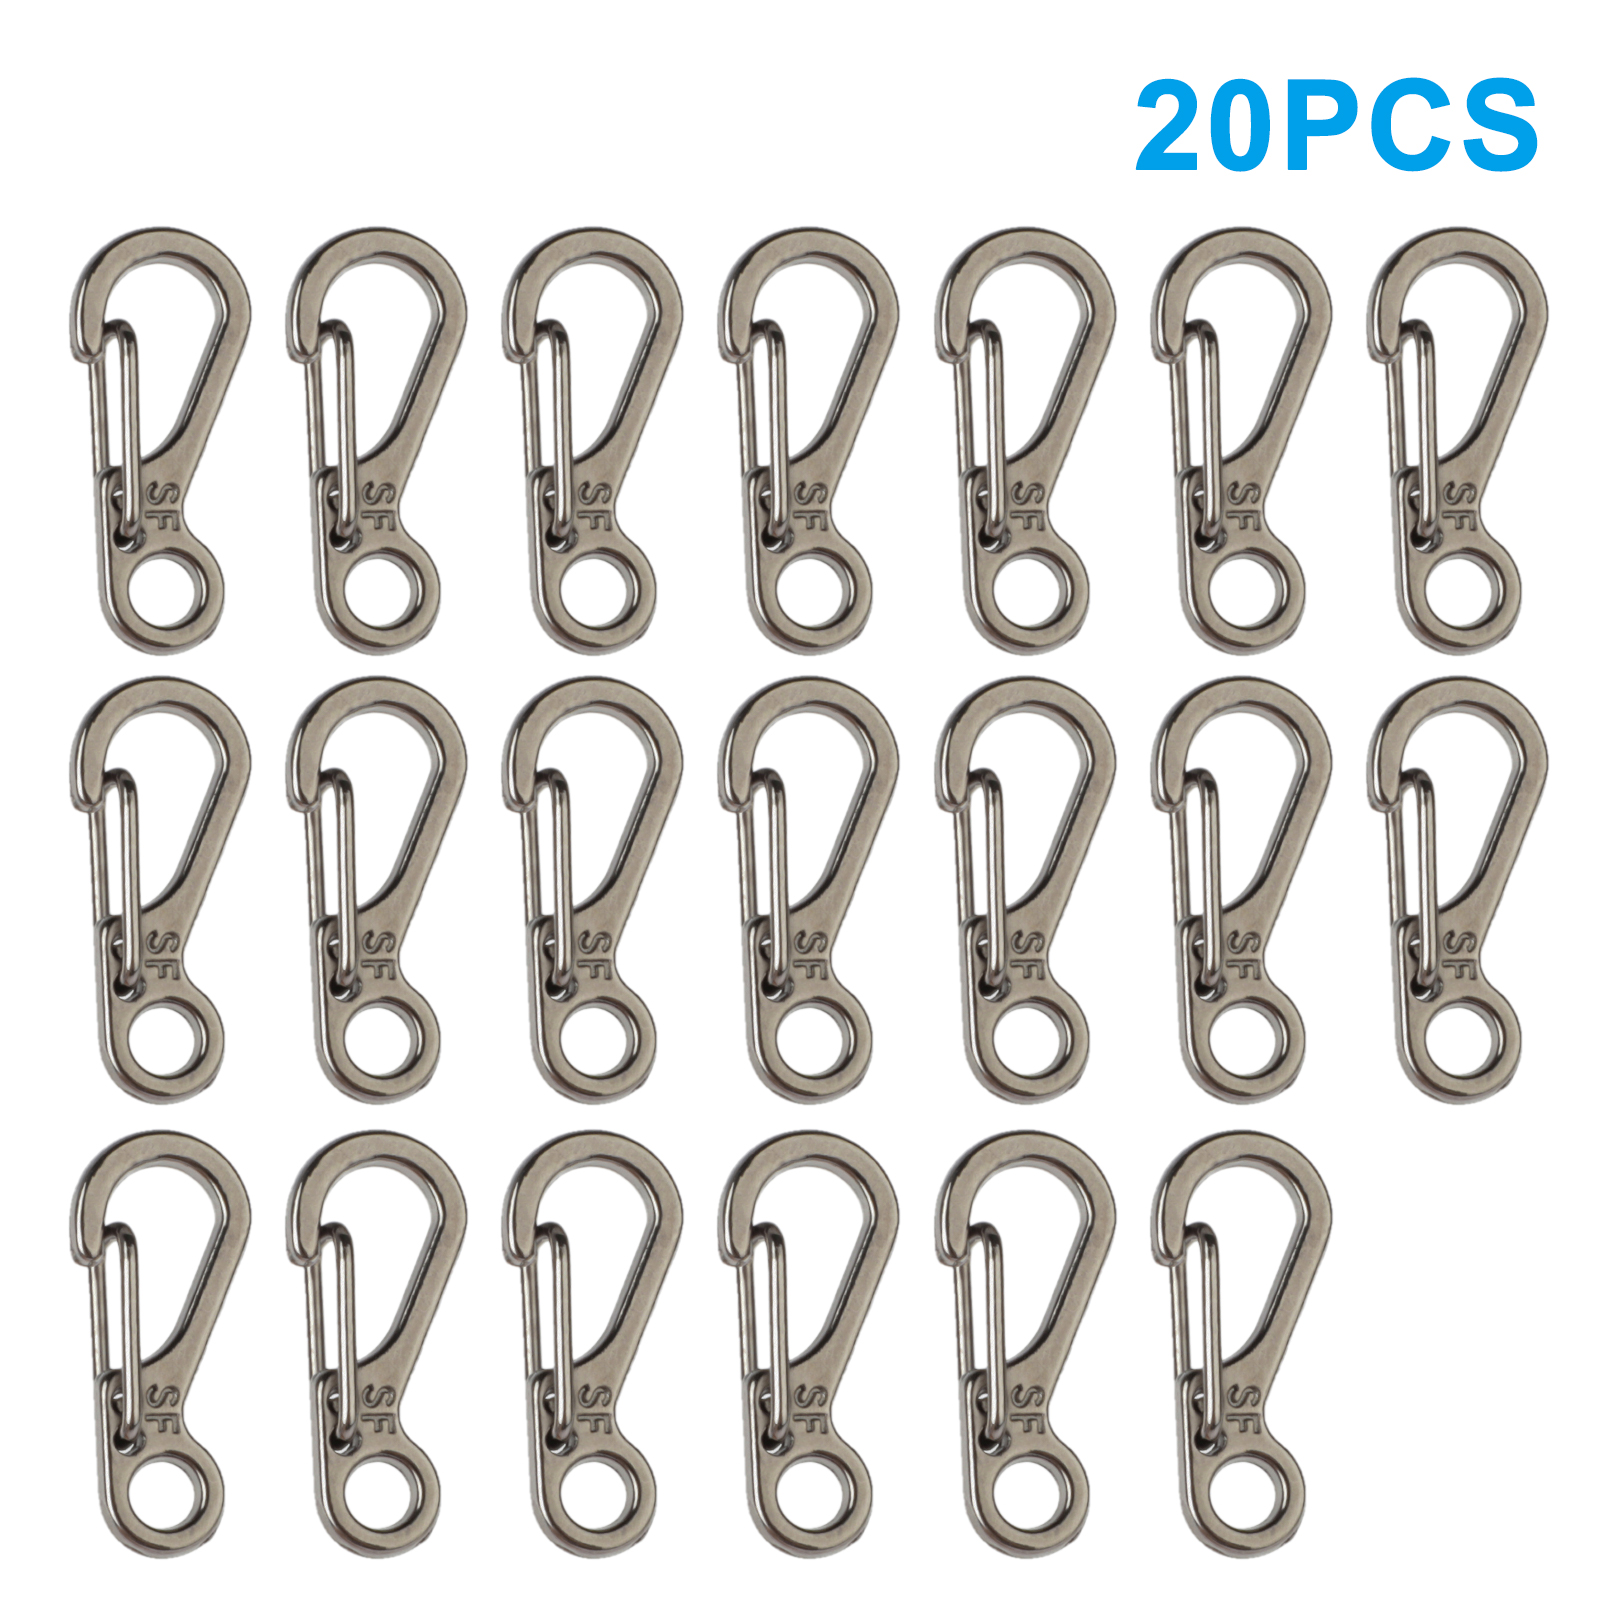 0.98" Round Spring Snap Hooks Clips Carabiners Gate O Ring Keyring Brass 